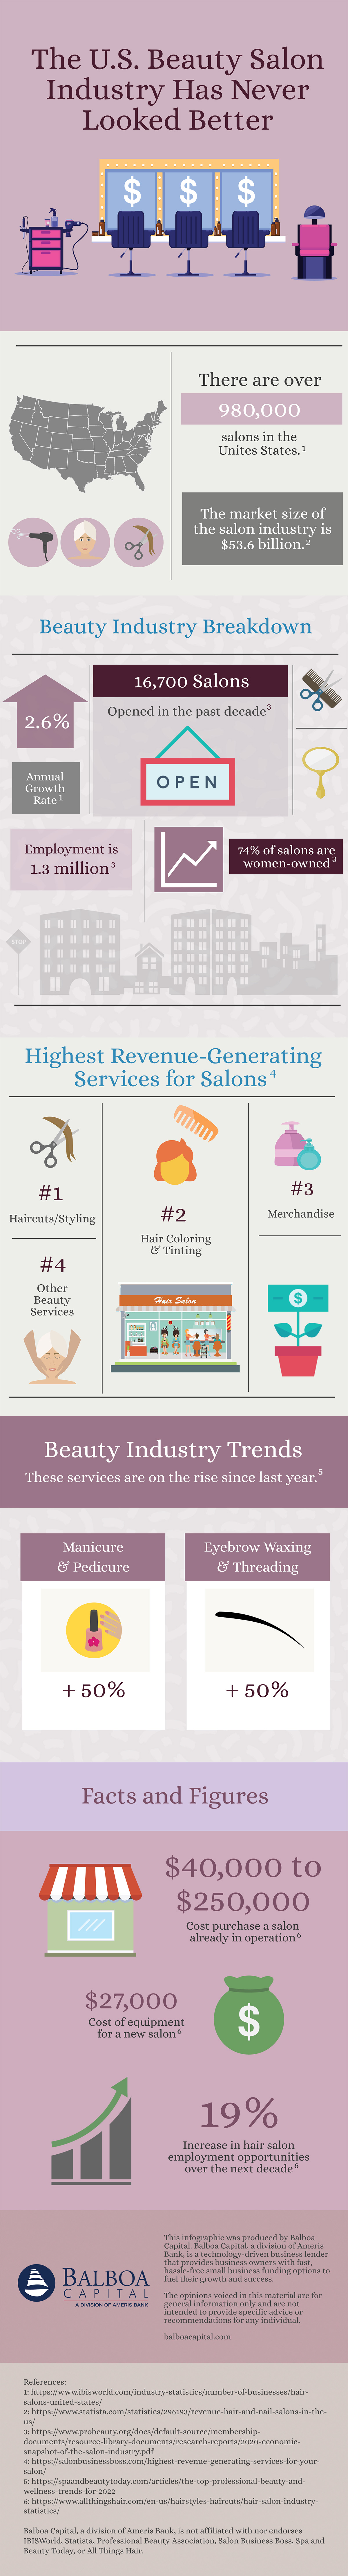 Beauty Salon Industry Infographic